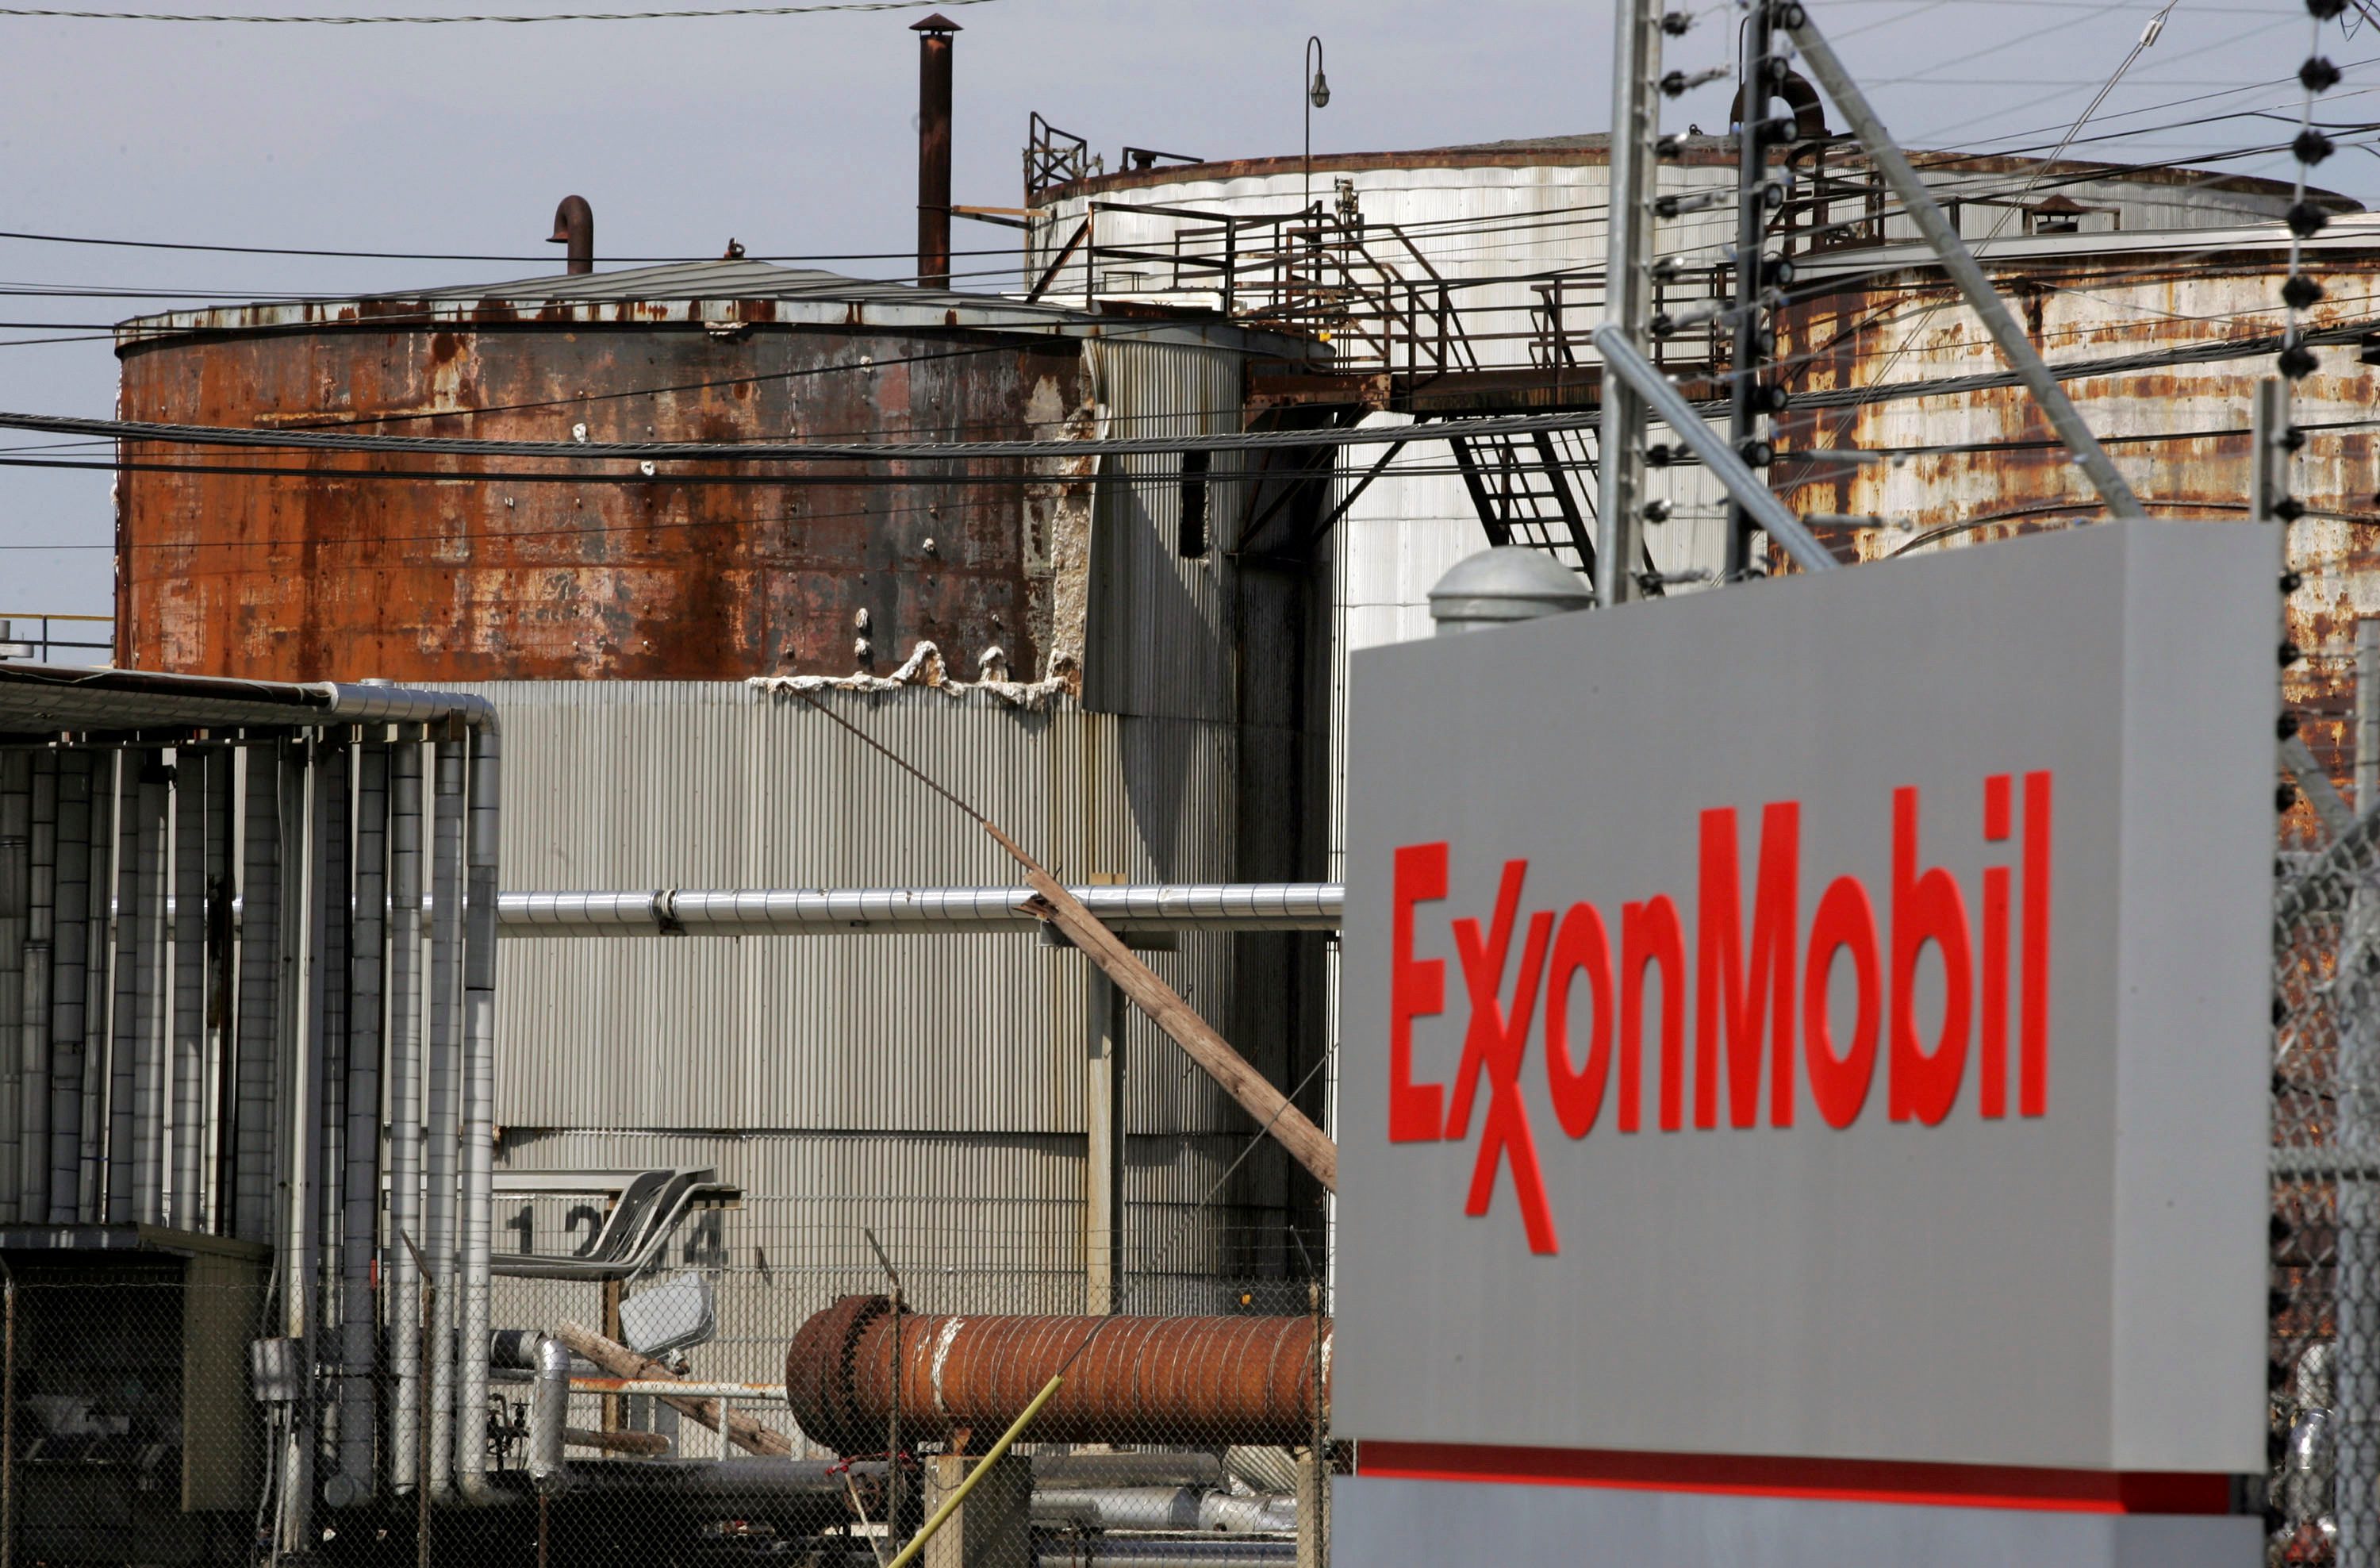 Exxon faces new pressure over dealings with Russia’s Rosneft